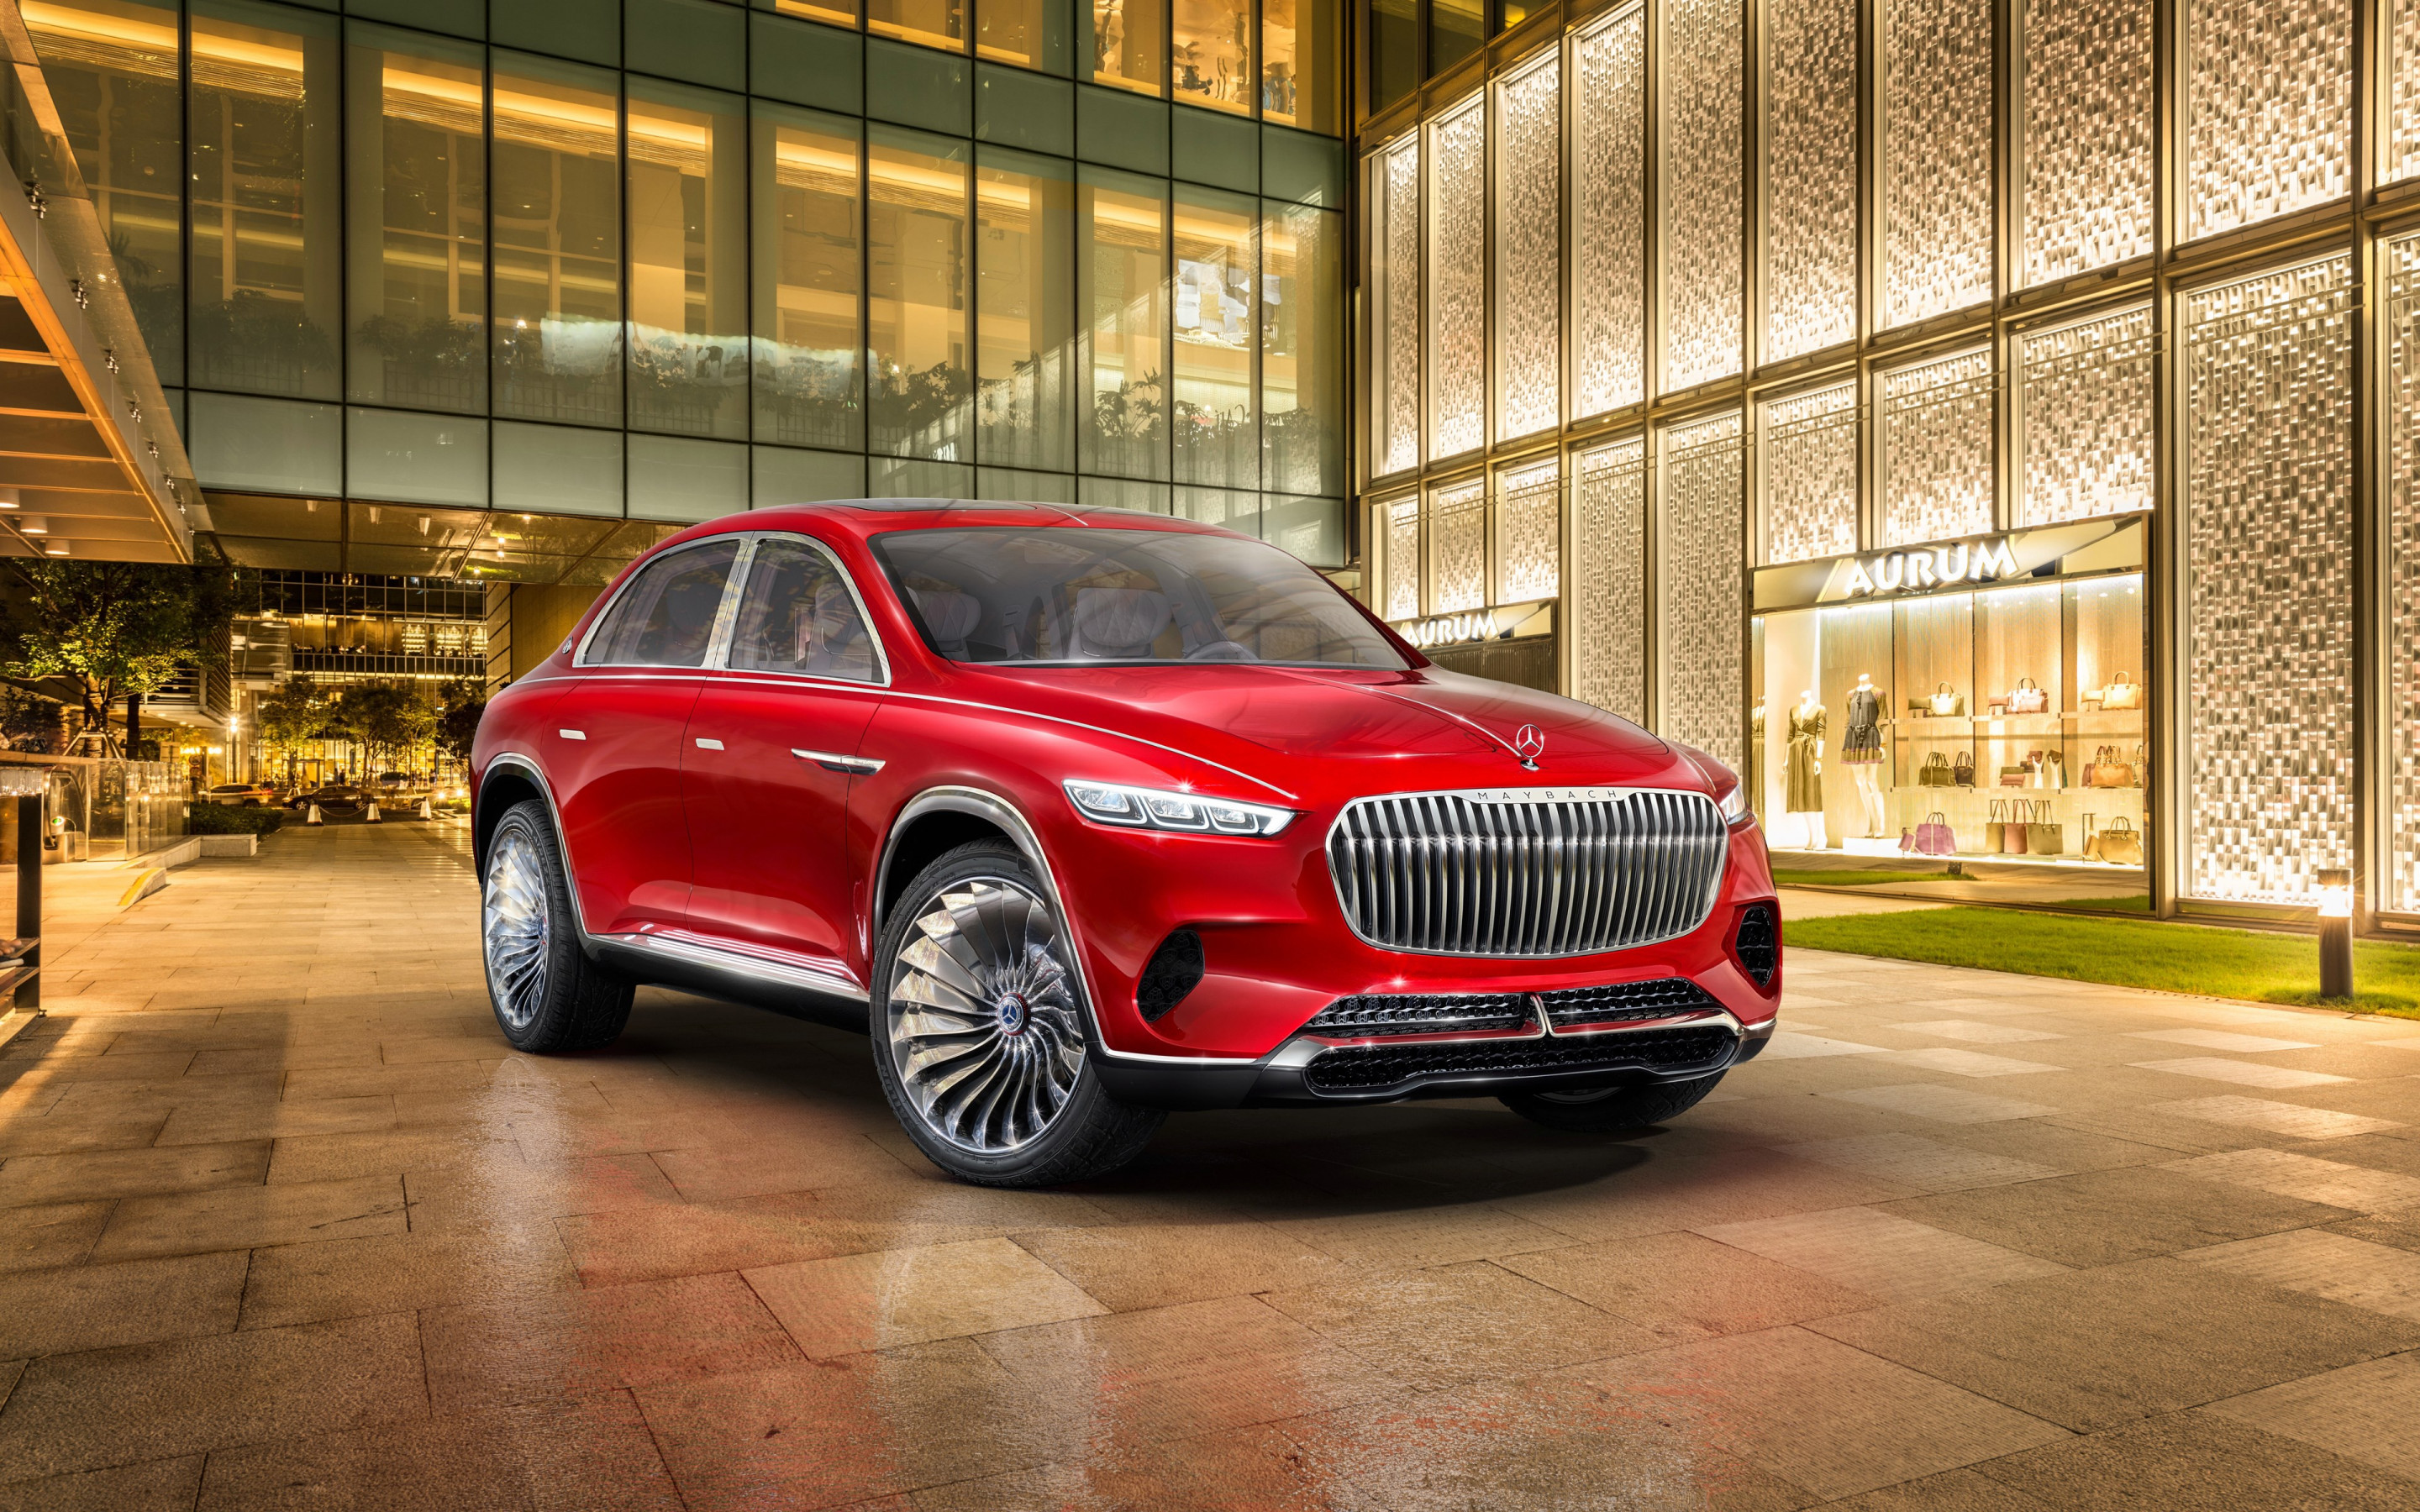 The Vision Mercedes Maybach Ultimate Luxury wallpaper 2880x1800